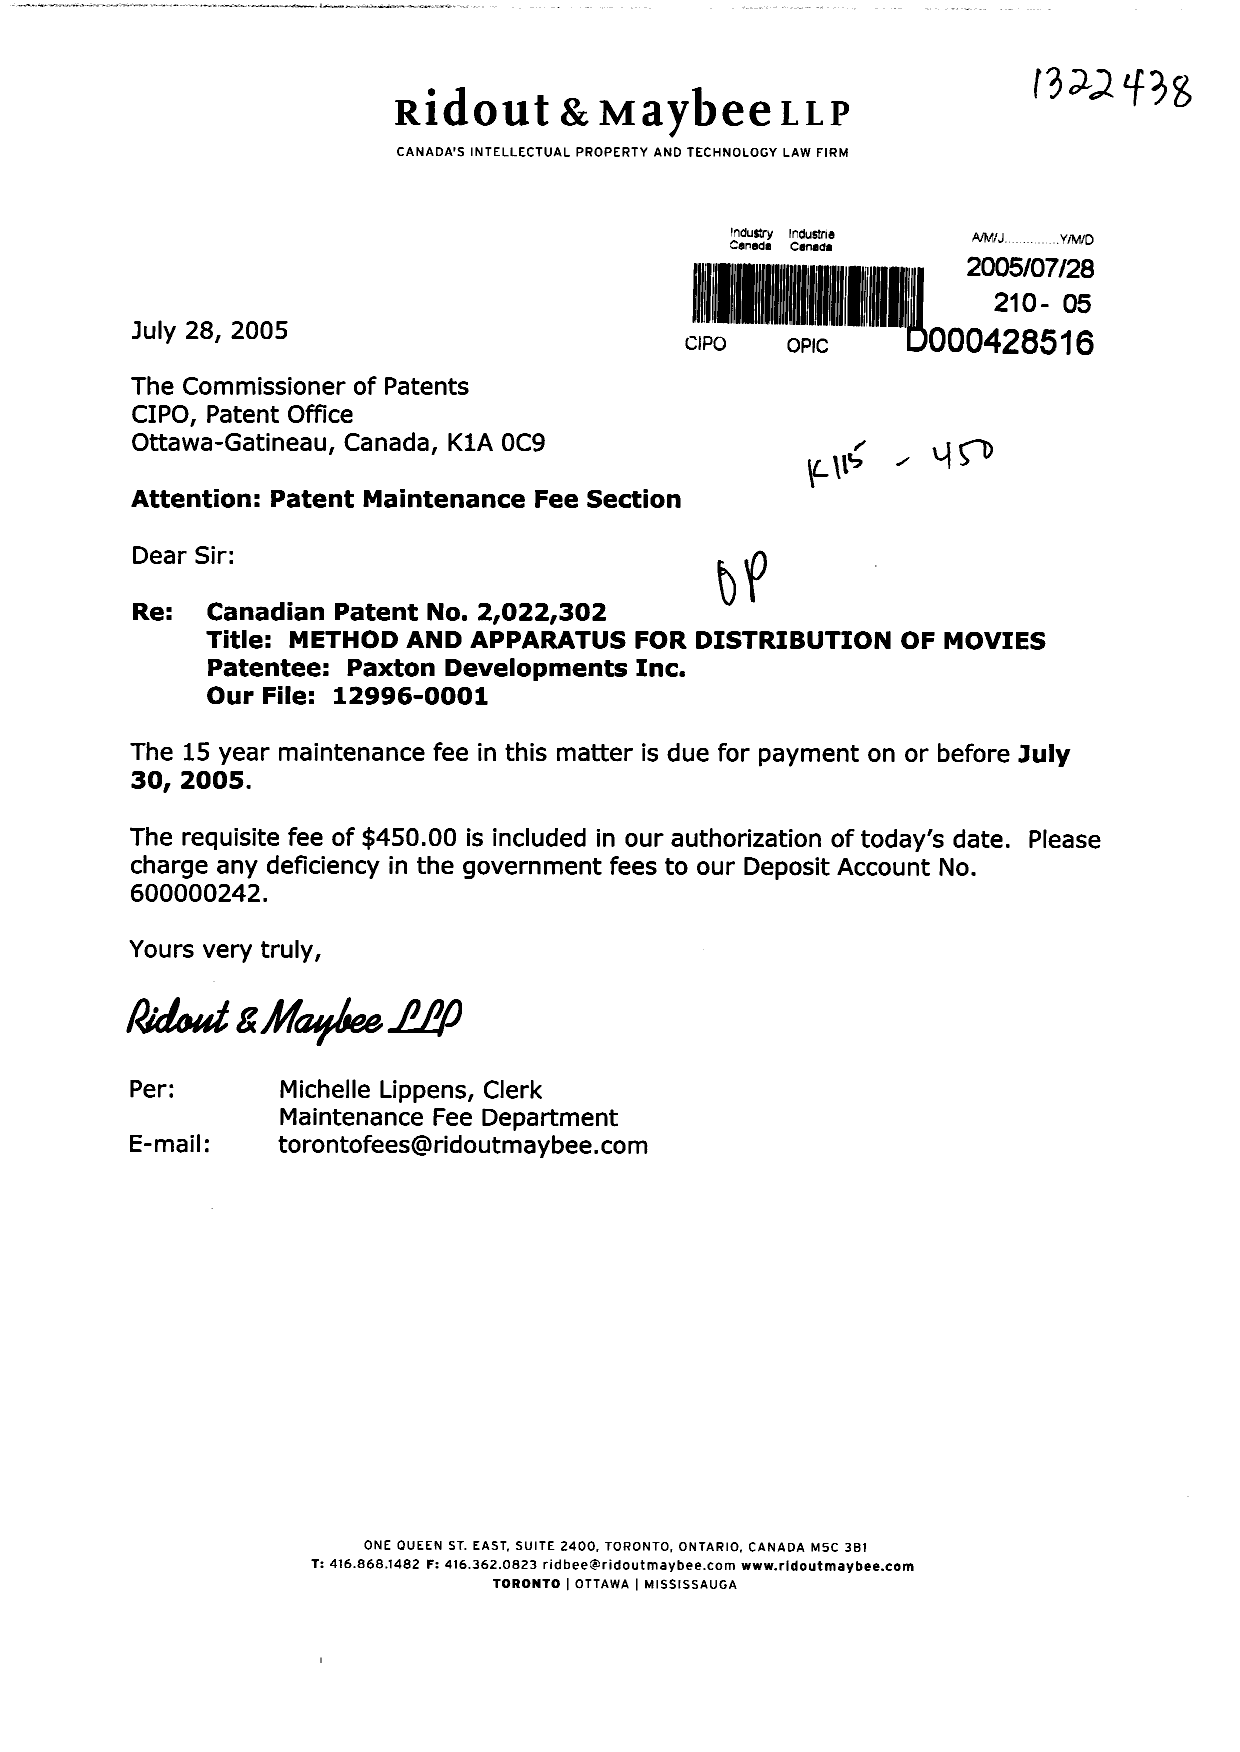 Canadian Patent Document 2022302. Fees 20050728. Image 1 of 1